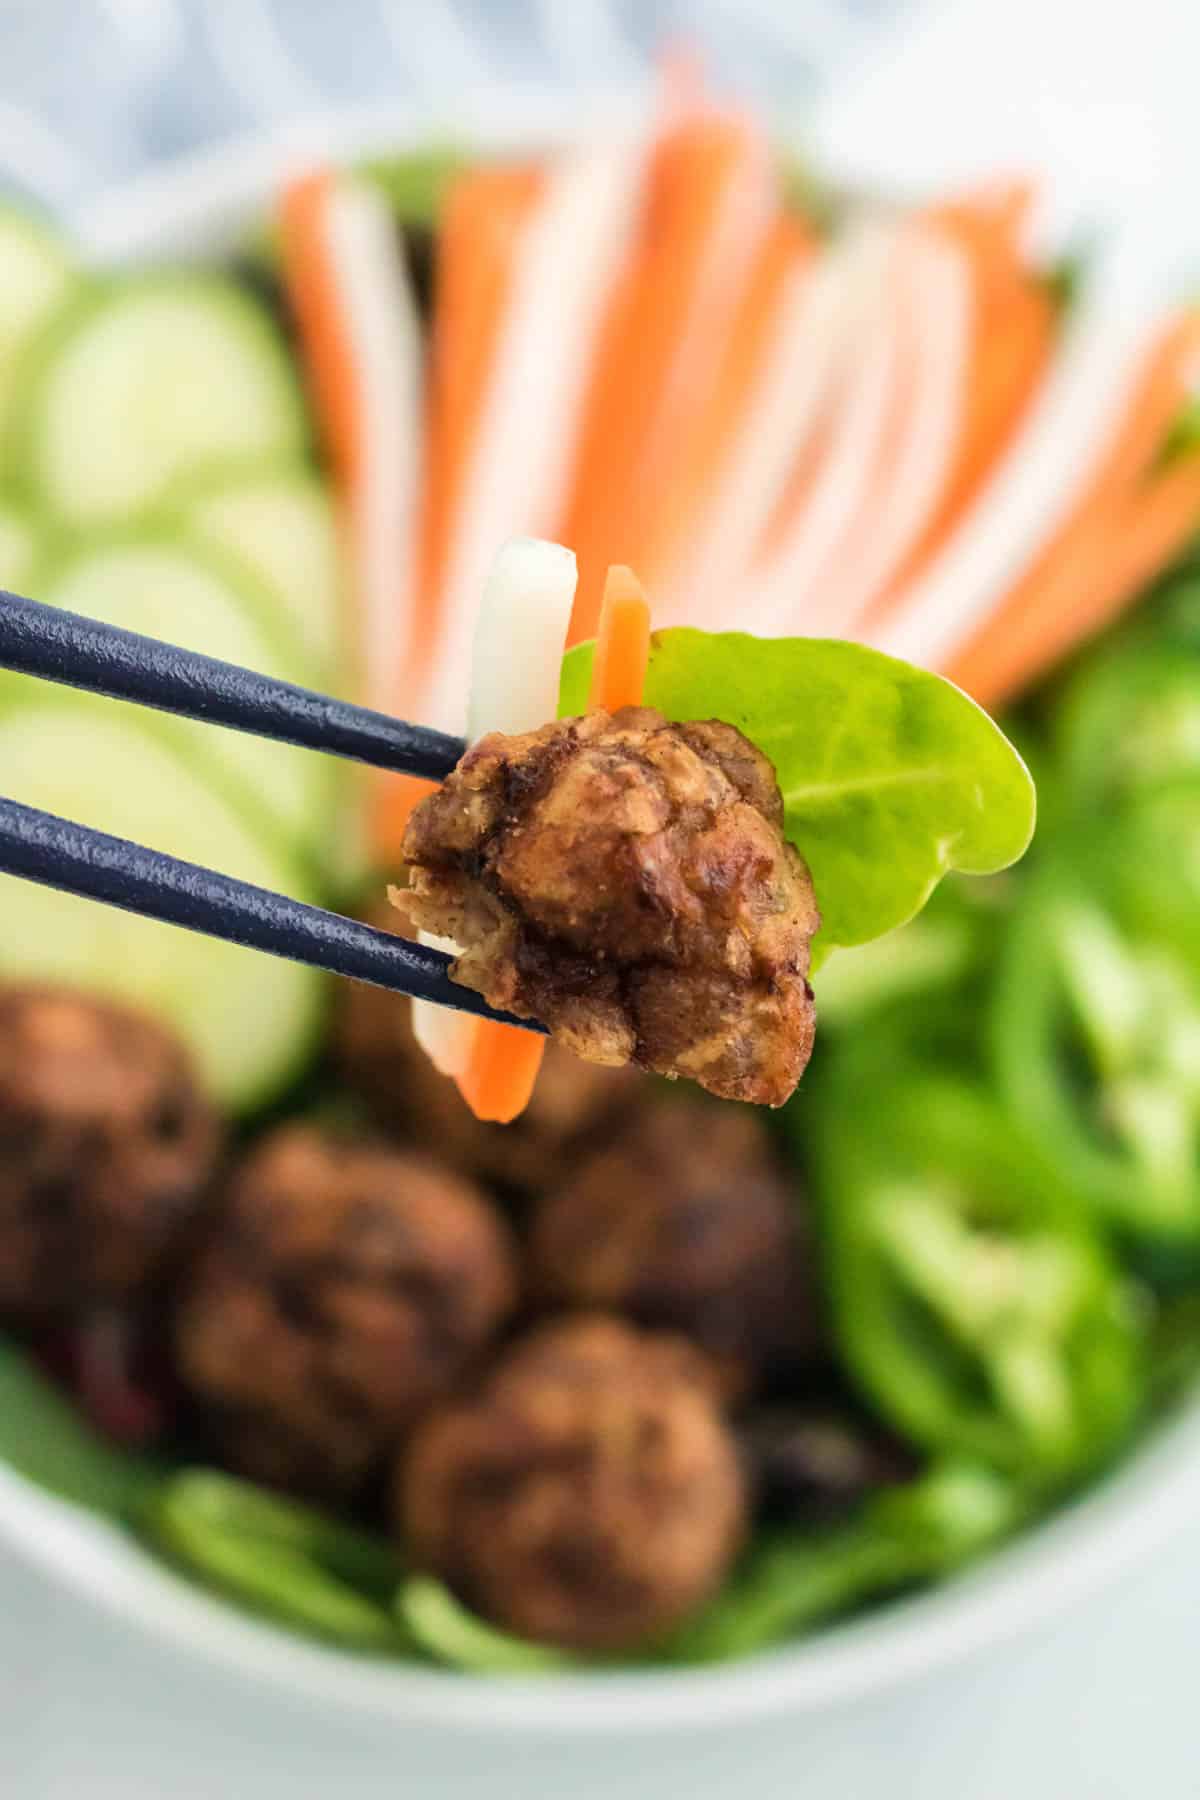 A spinach leaf, a piece of pork meatball, and a slice of pickled radish and carrot balanced between chopsticks in front of banh mi salad